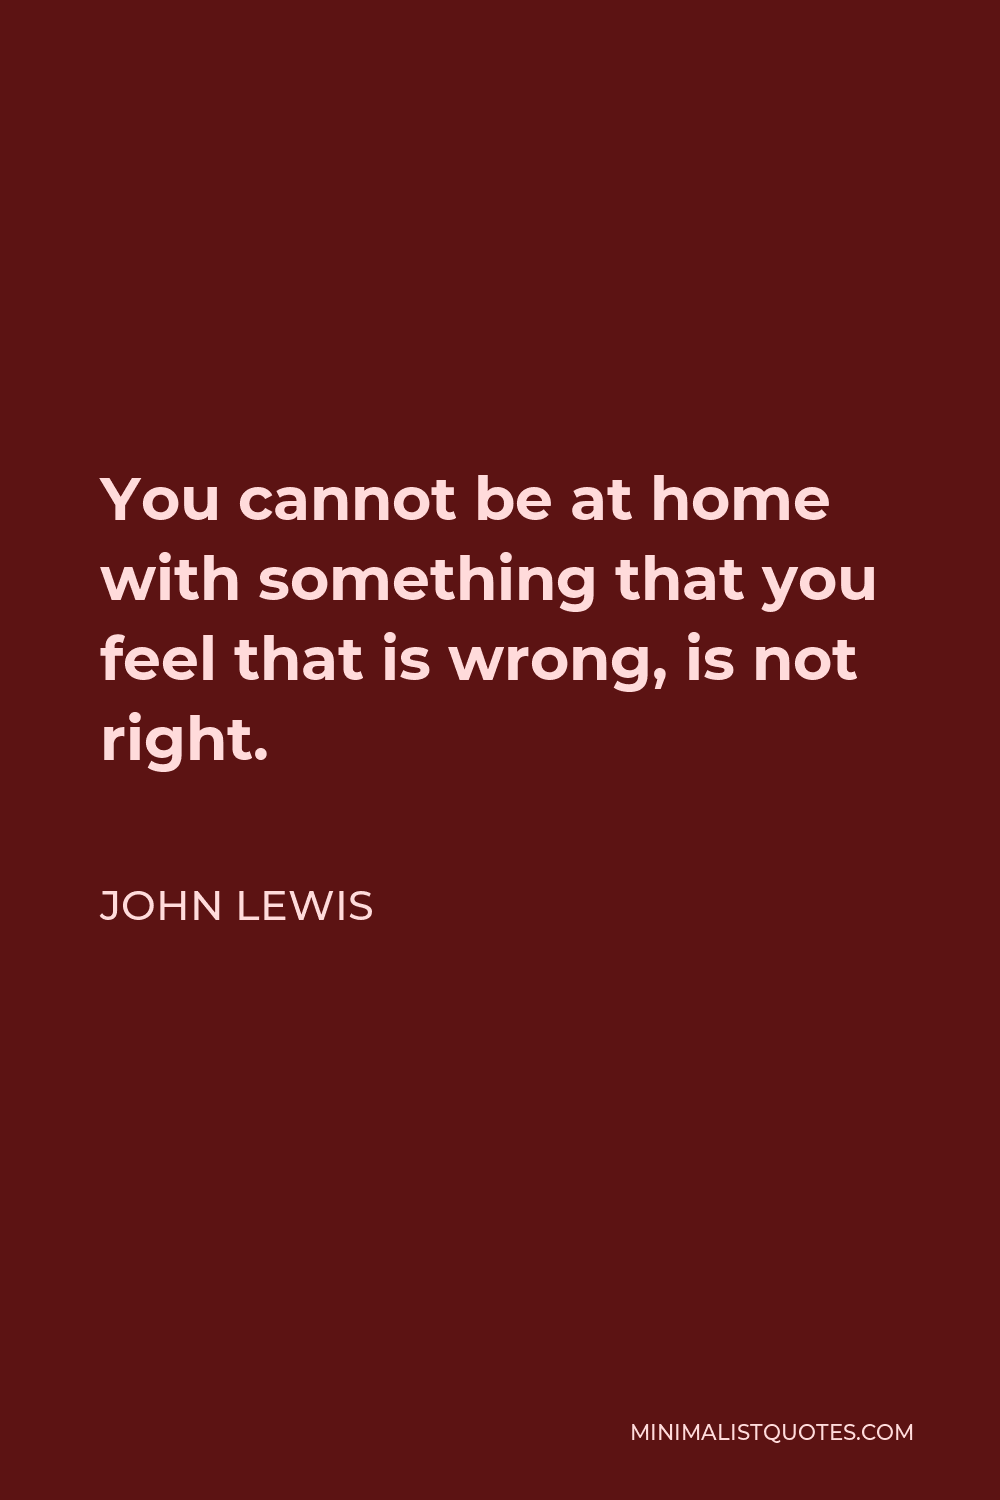 John Lewis Quote - You cannot be at home with something that you feel that is wrong, is not right.